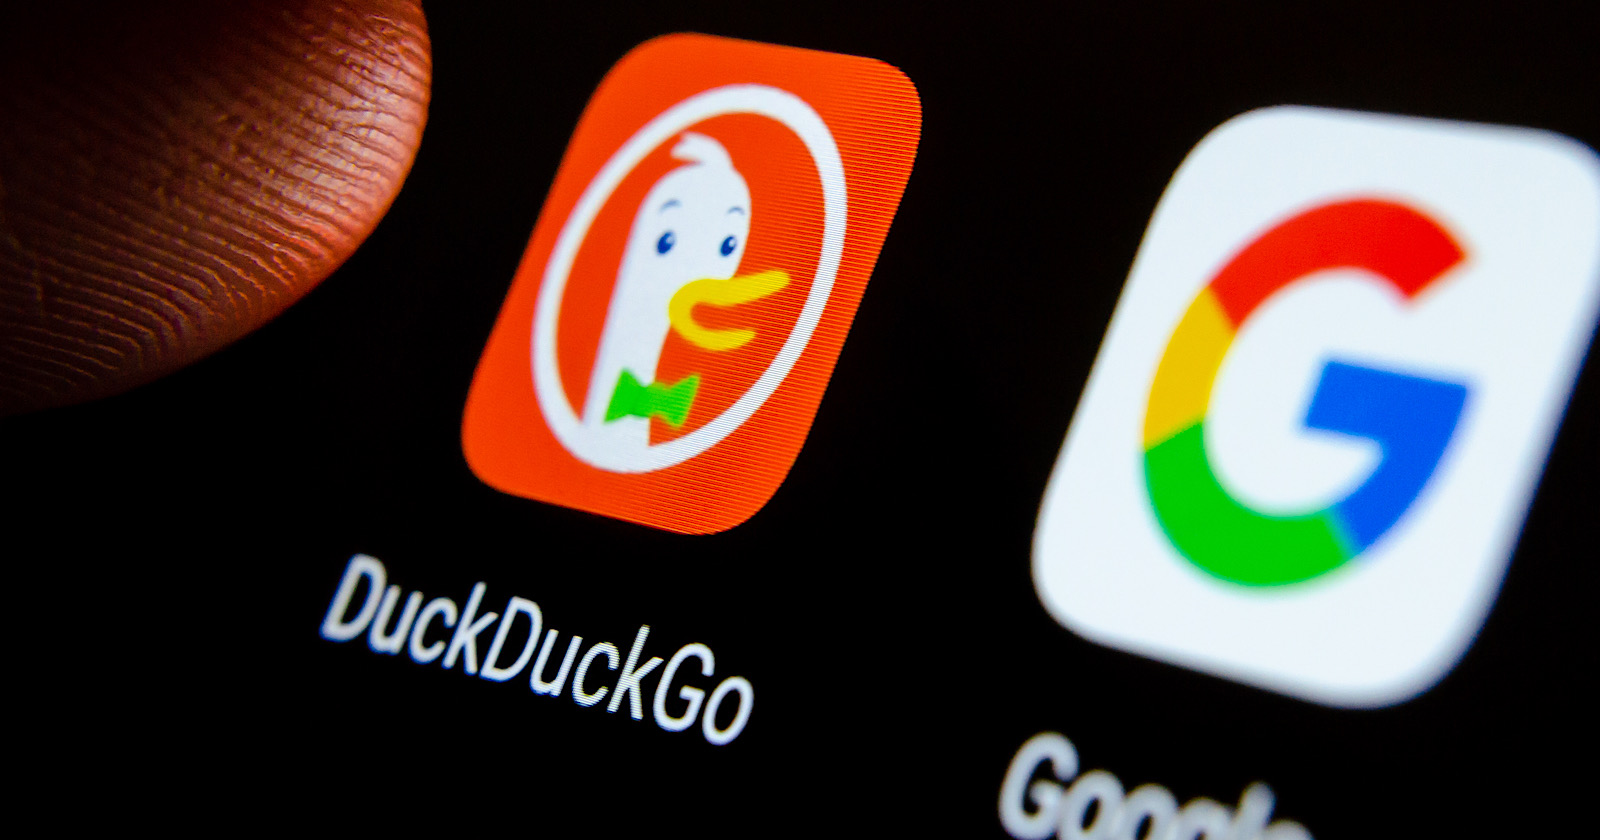 duckduckgo is now a default search engine option on android in the eu via mattgsouthern